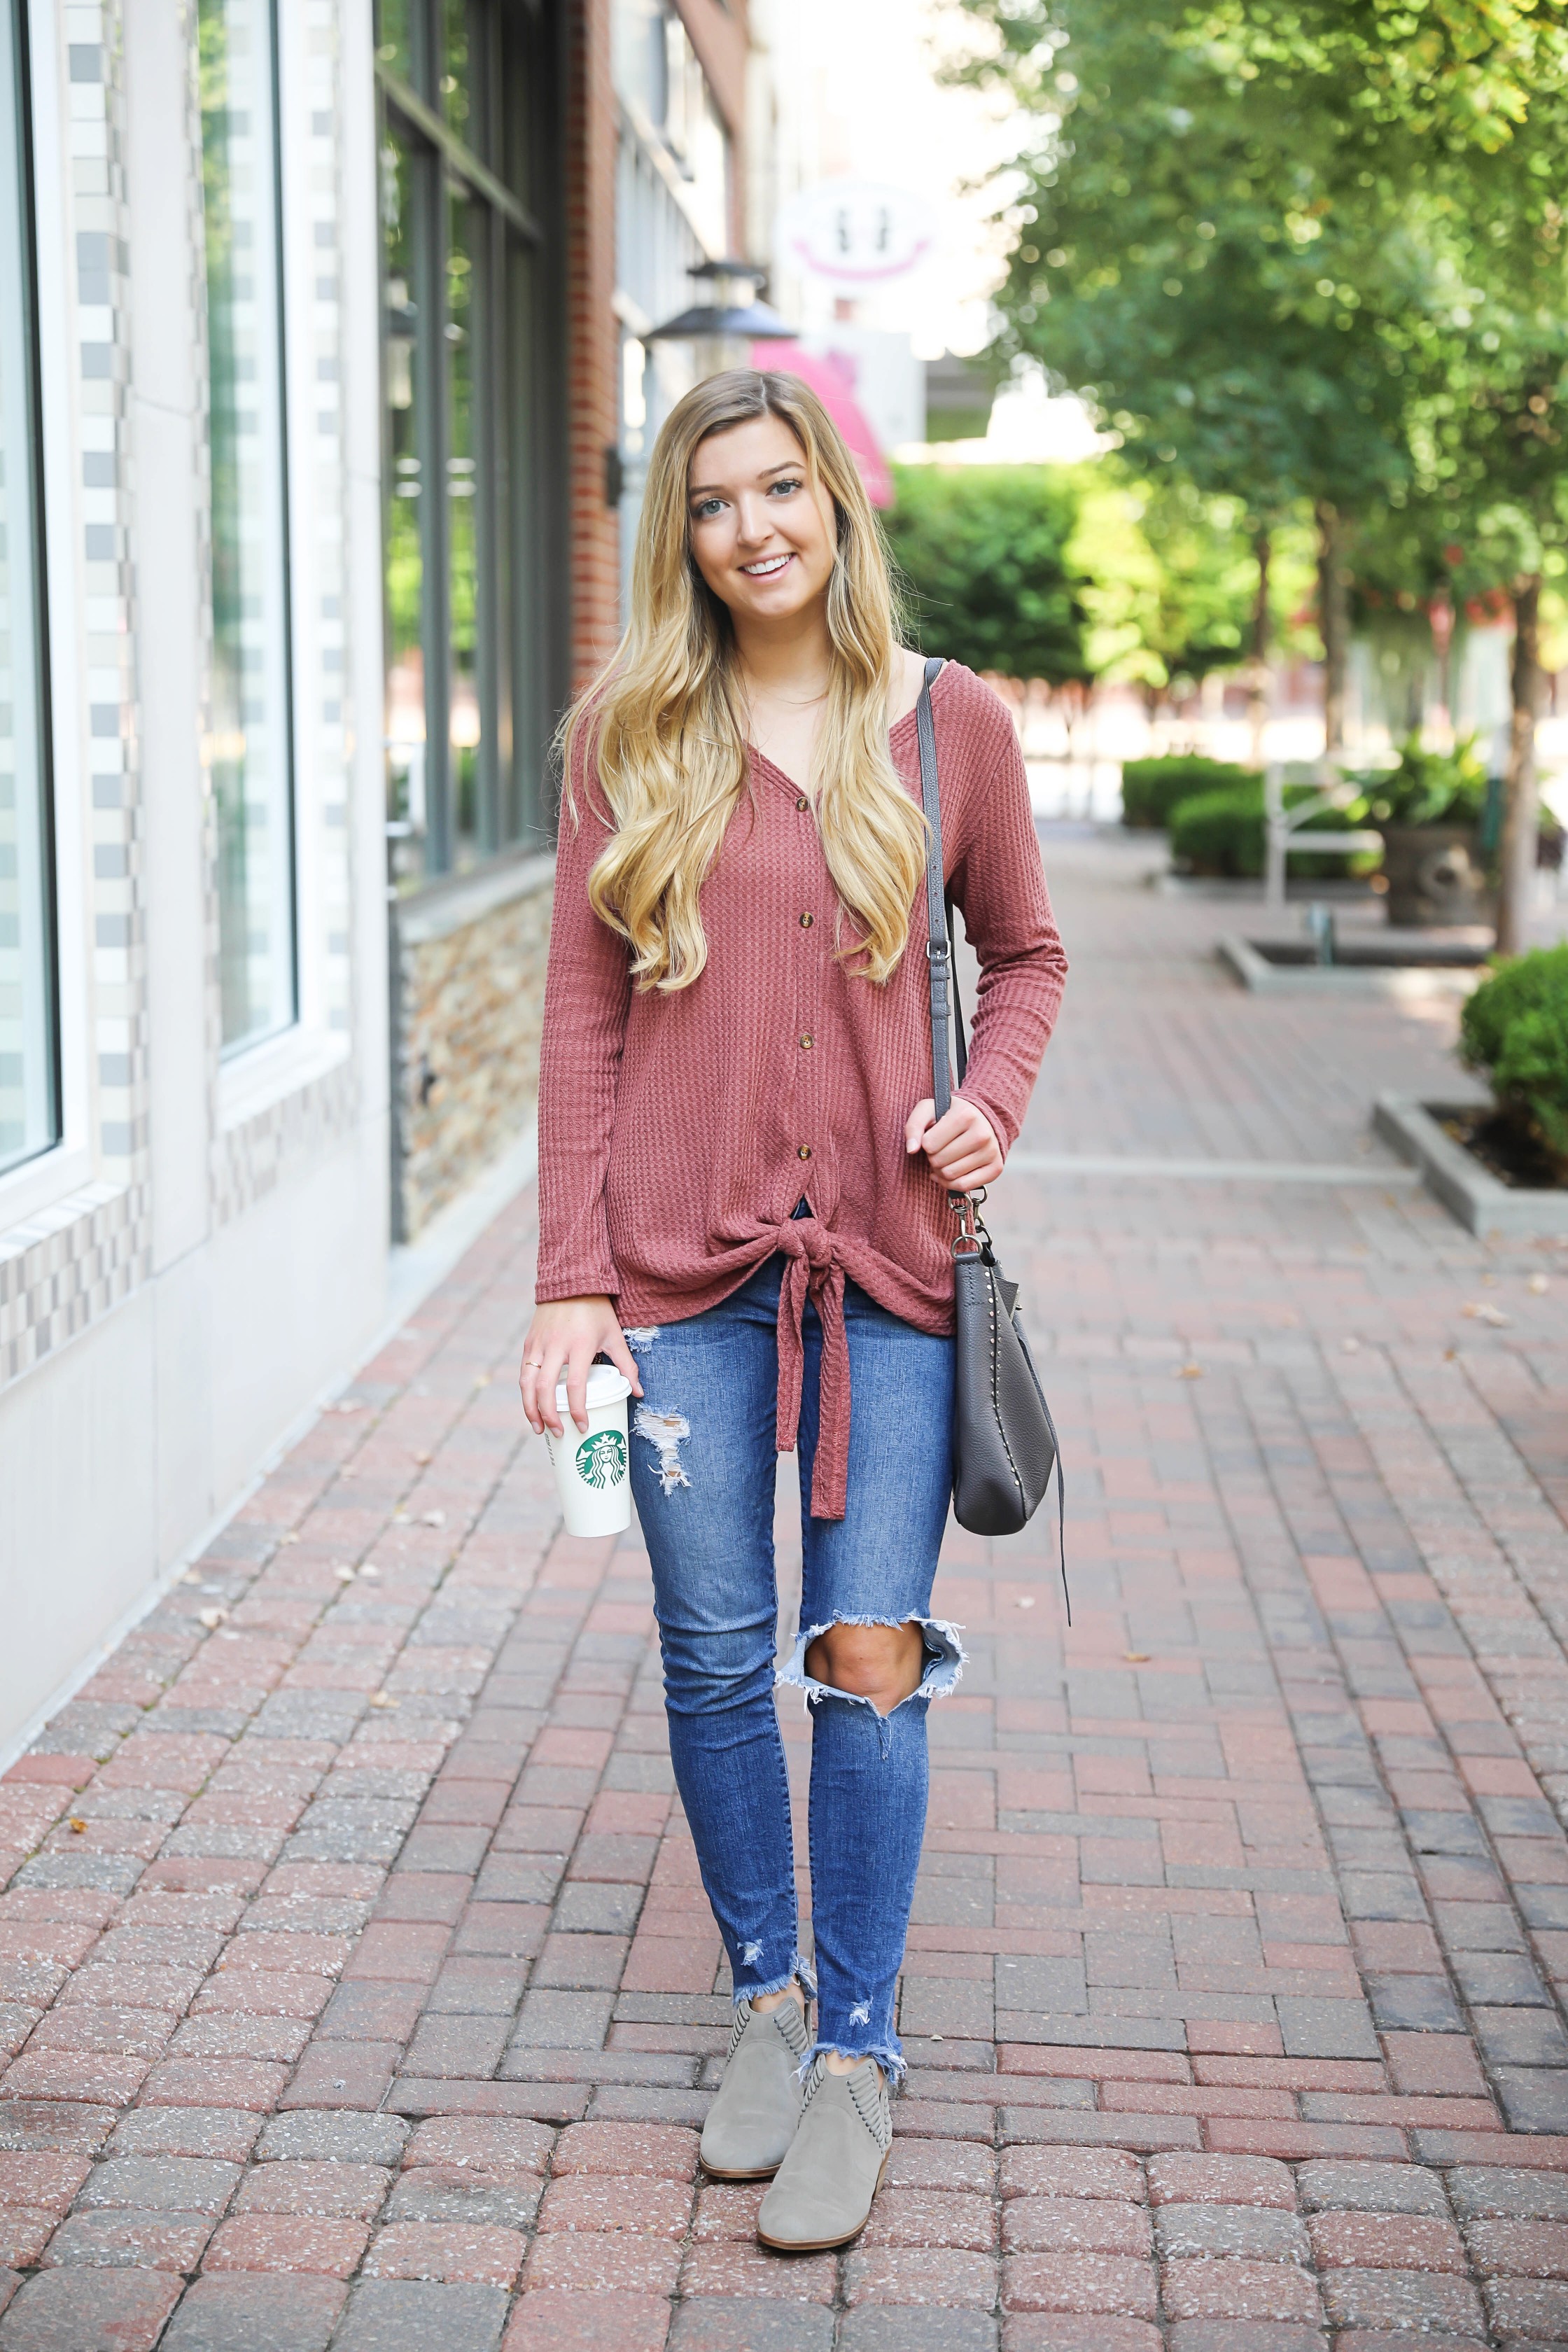 Burgundy waffle top! These waffle tops are all the rage, I love when they are tied on the end! It comes in a ton of cute fall colors. I paired mine with ripped denim jeans and this cute Rebecca Minkoff purse! Such a cute fall outfit for back to school! Details on fashion blog daily dose of charm by lauren lindmark